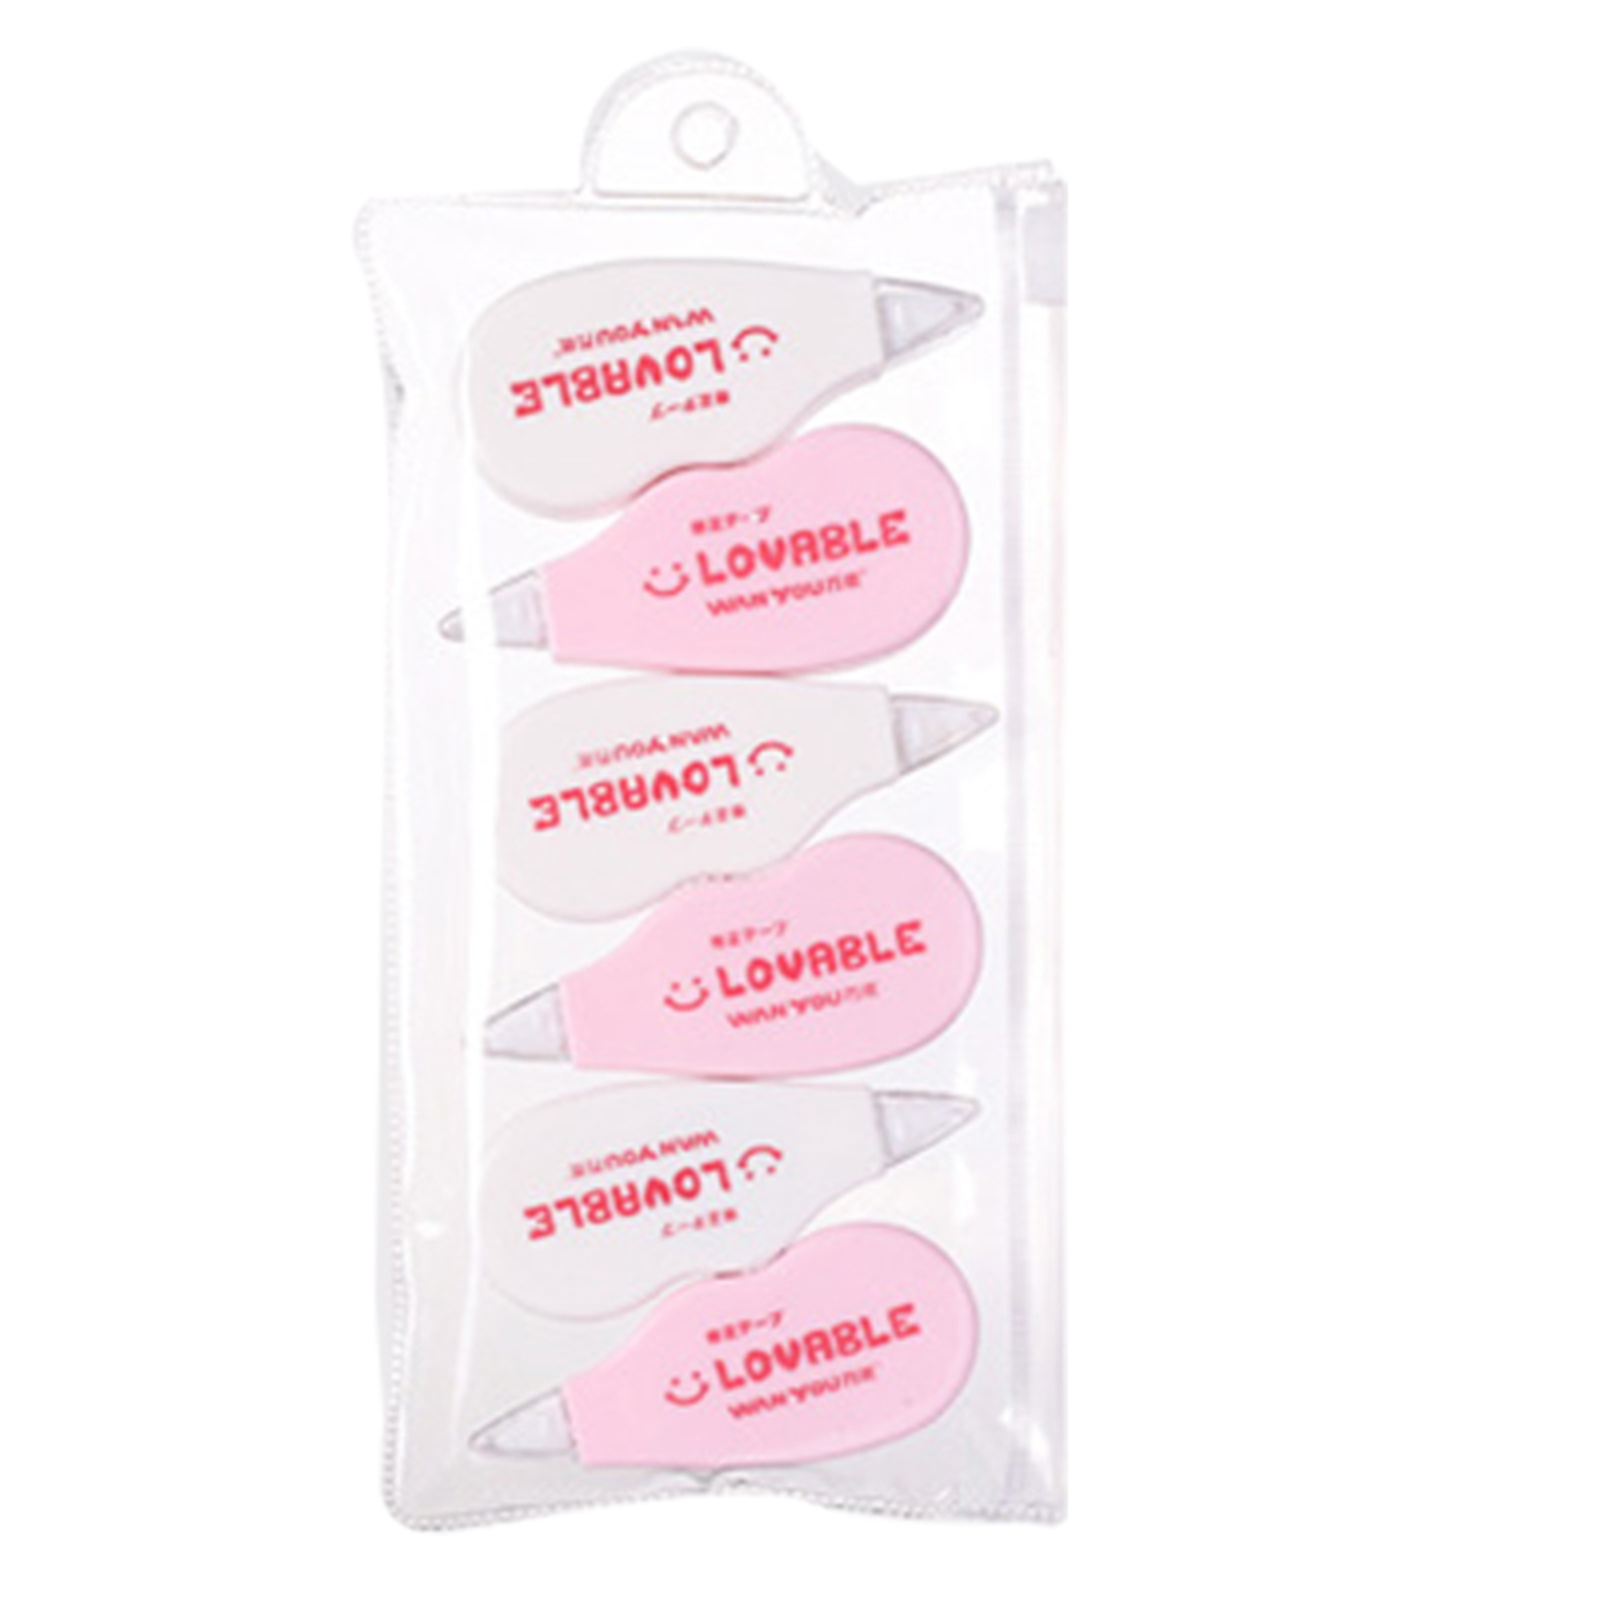 6pcs Mini Correct Correction Tape White Translucent Dispenser Assorted Colors Easy to Use for Working Studying KQS8